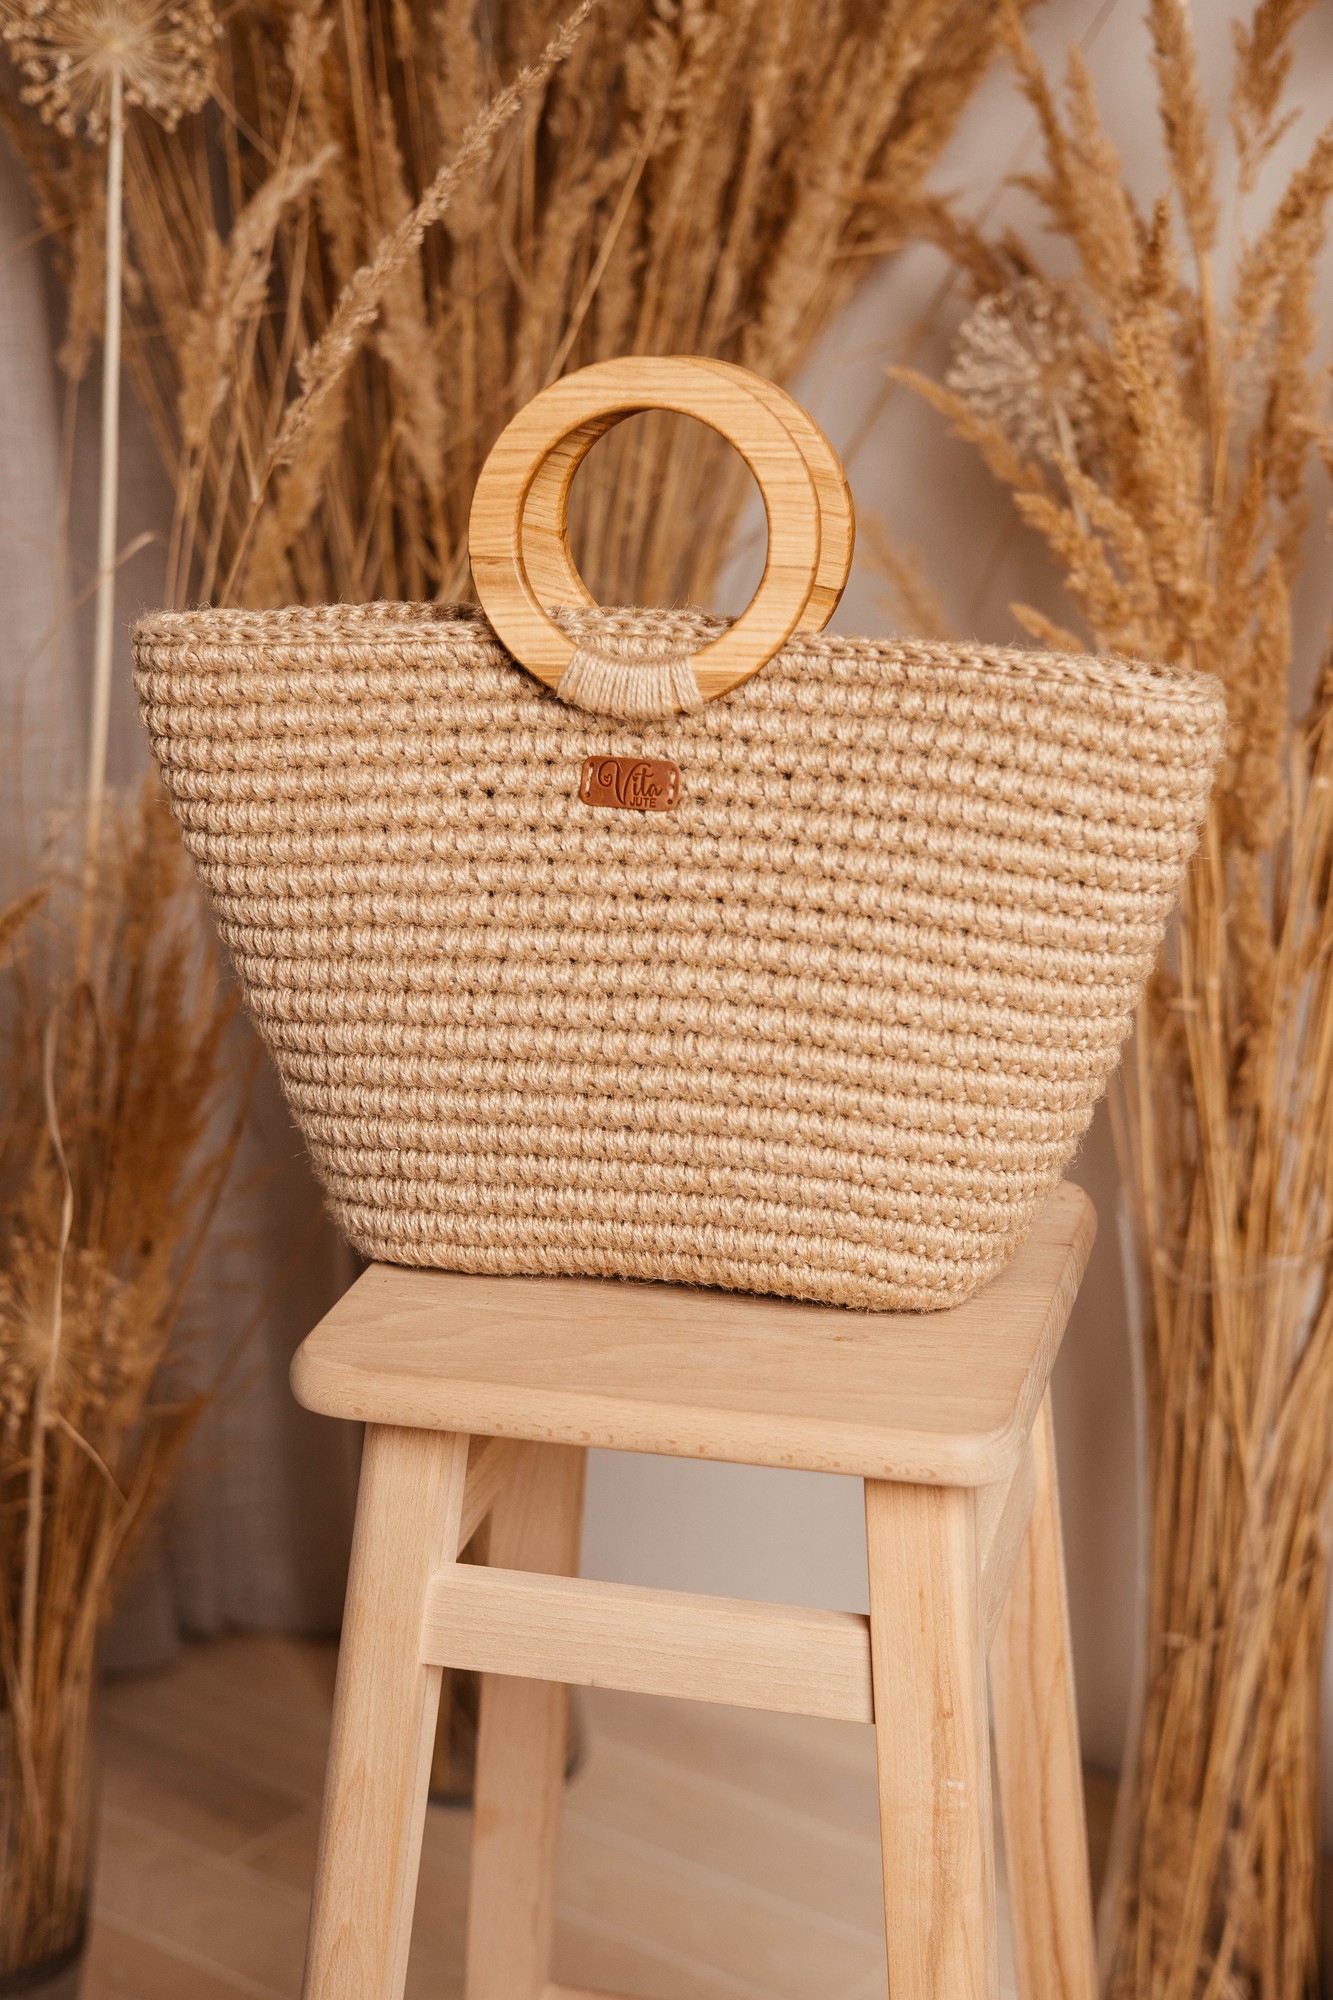 Handmade jute knitted bag made from eco-friendly jute